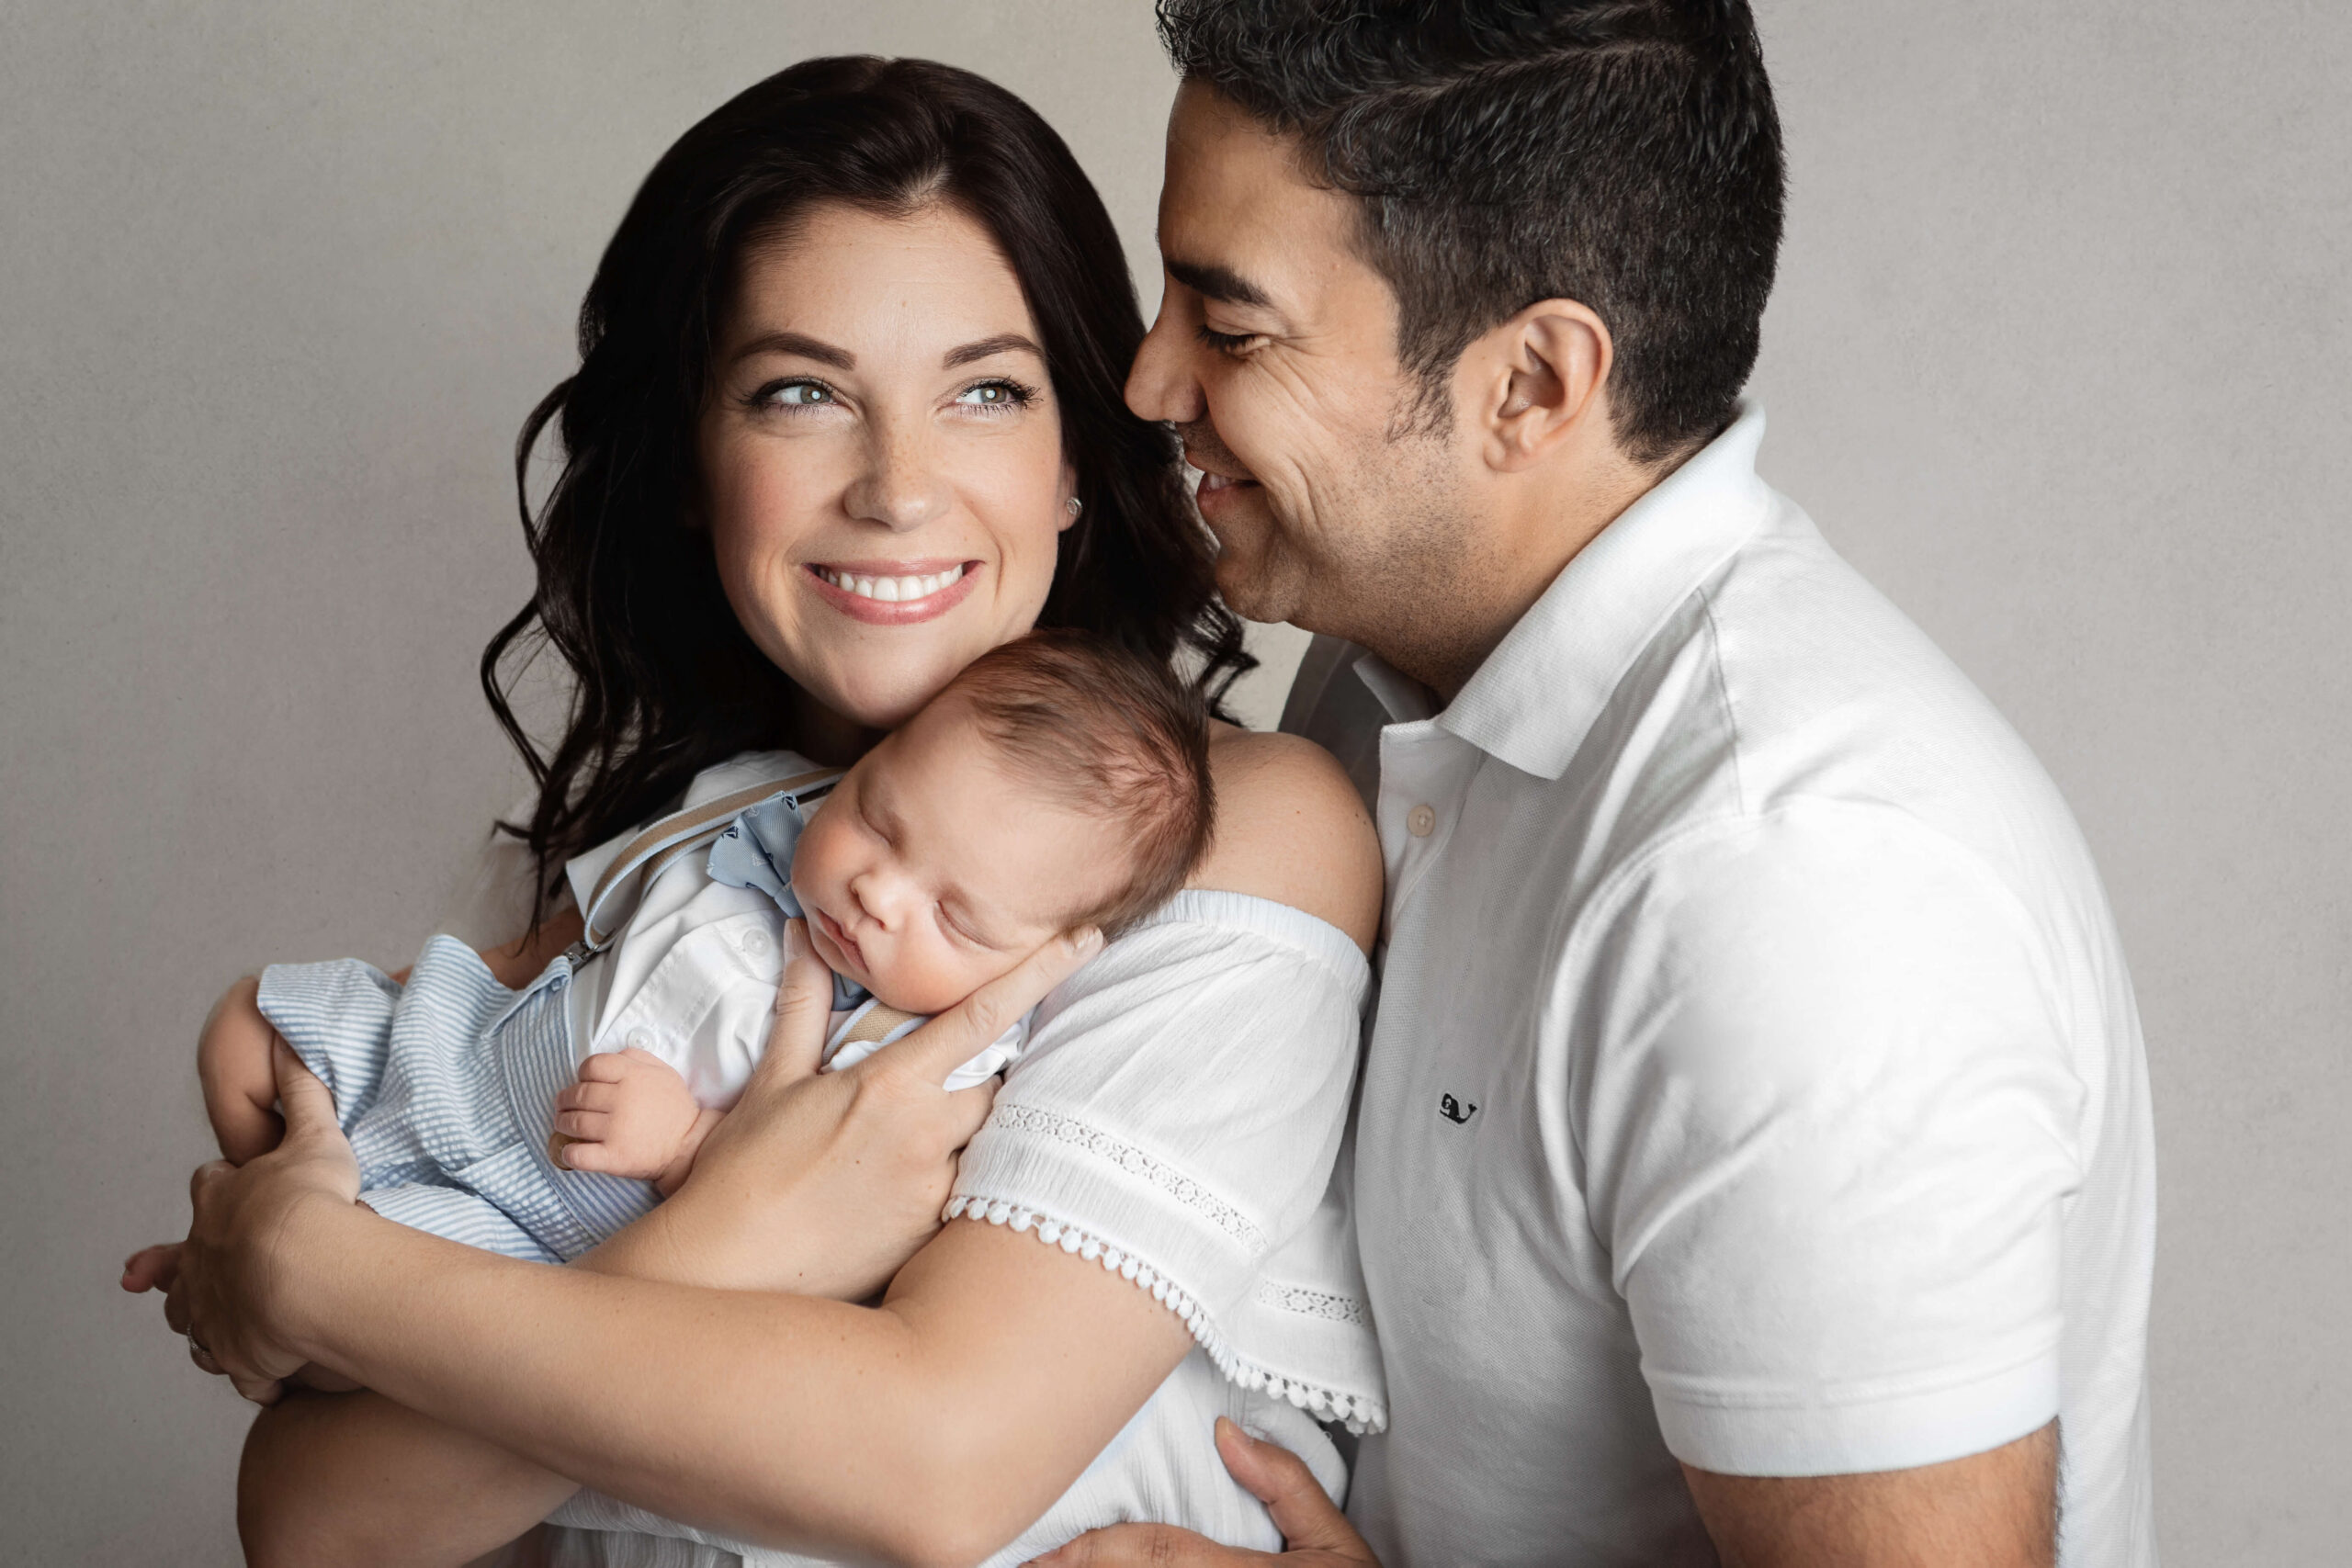 newborn parent image taken at a family newborn session, mom and dad wearing white tops holding their newborn baby boy in a cute outfit